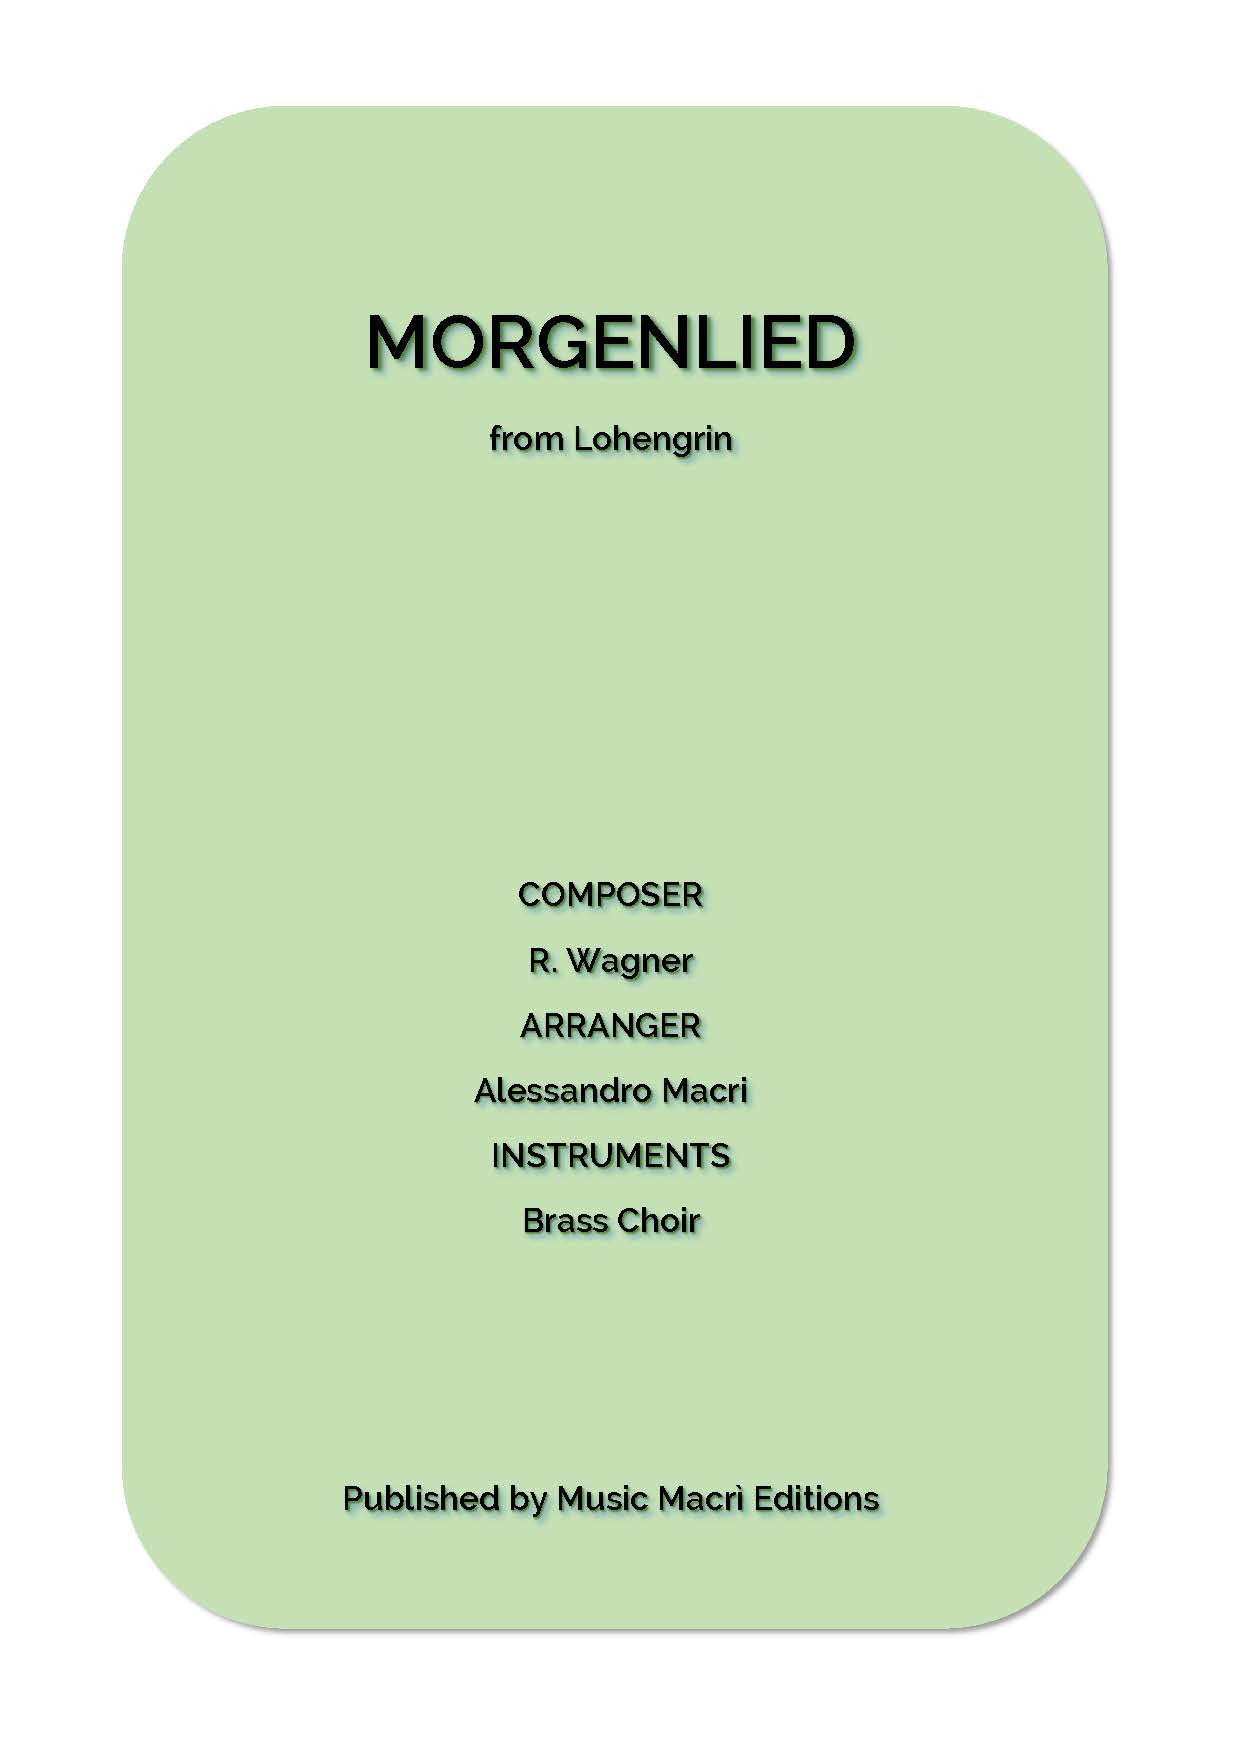 MORGENLIED Wagner Completo Pagina 01